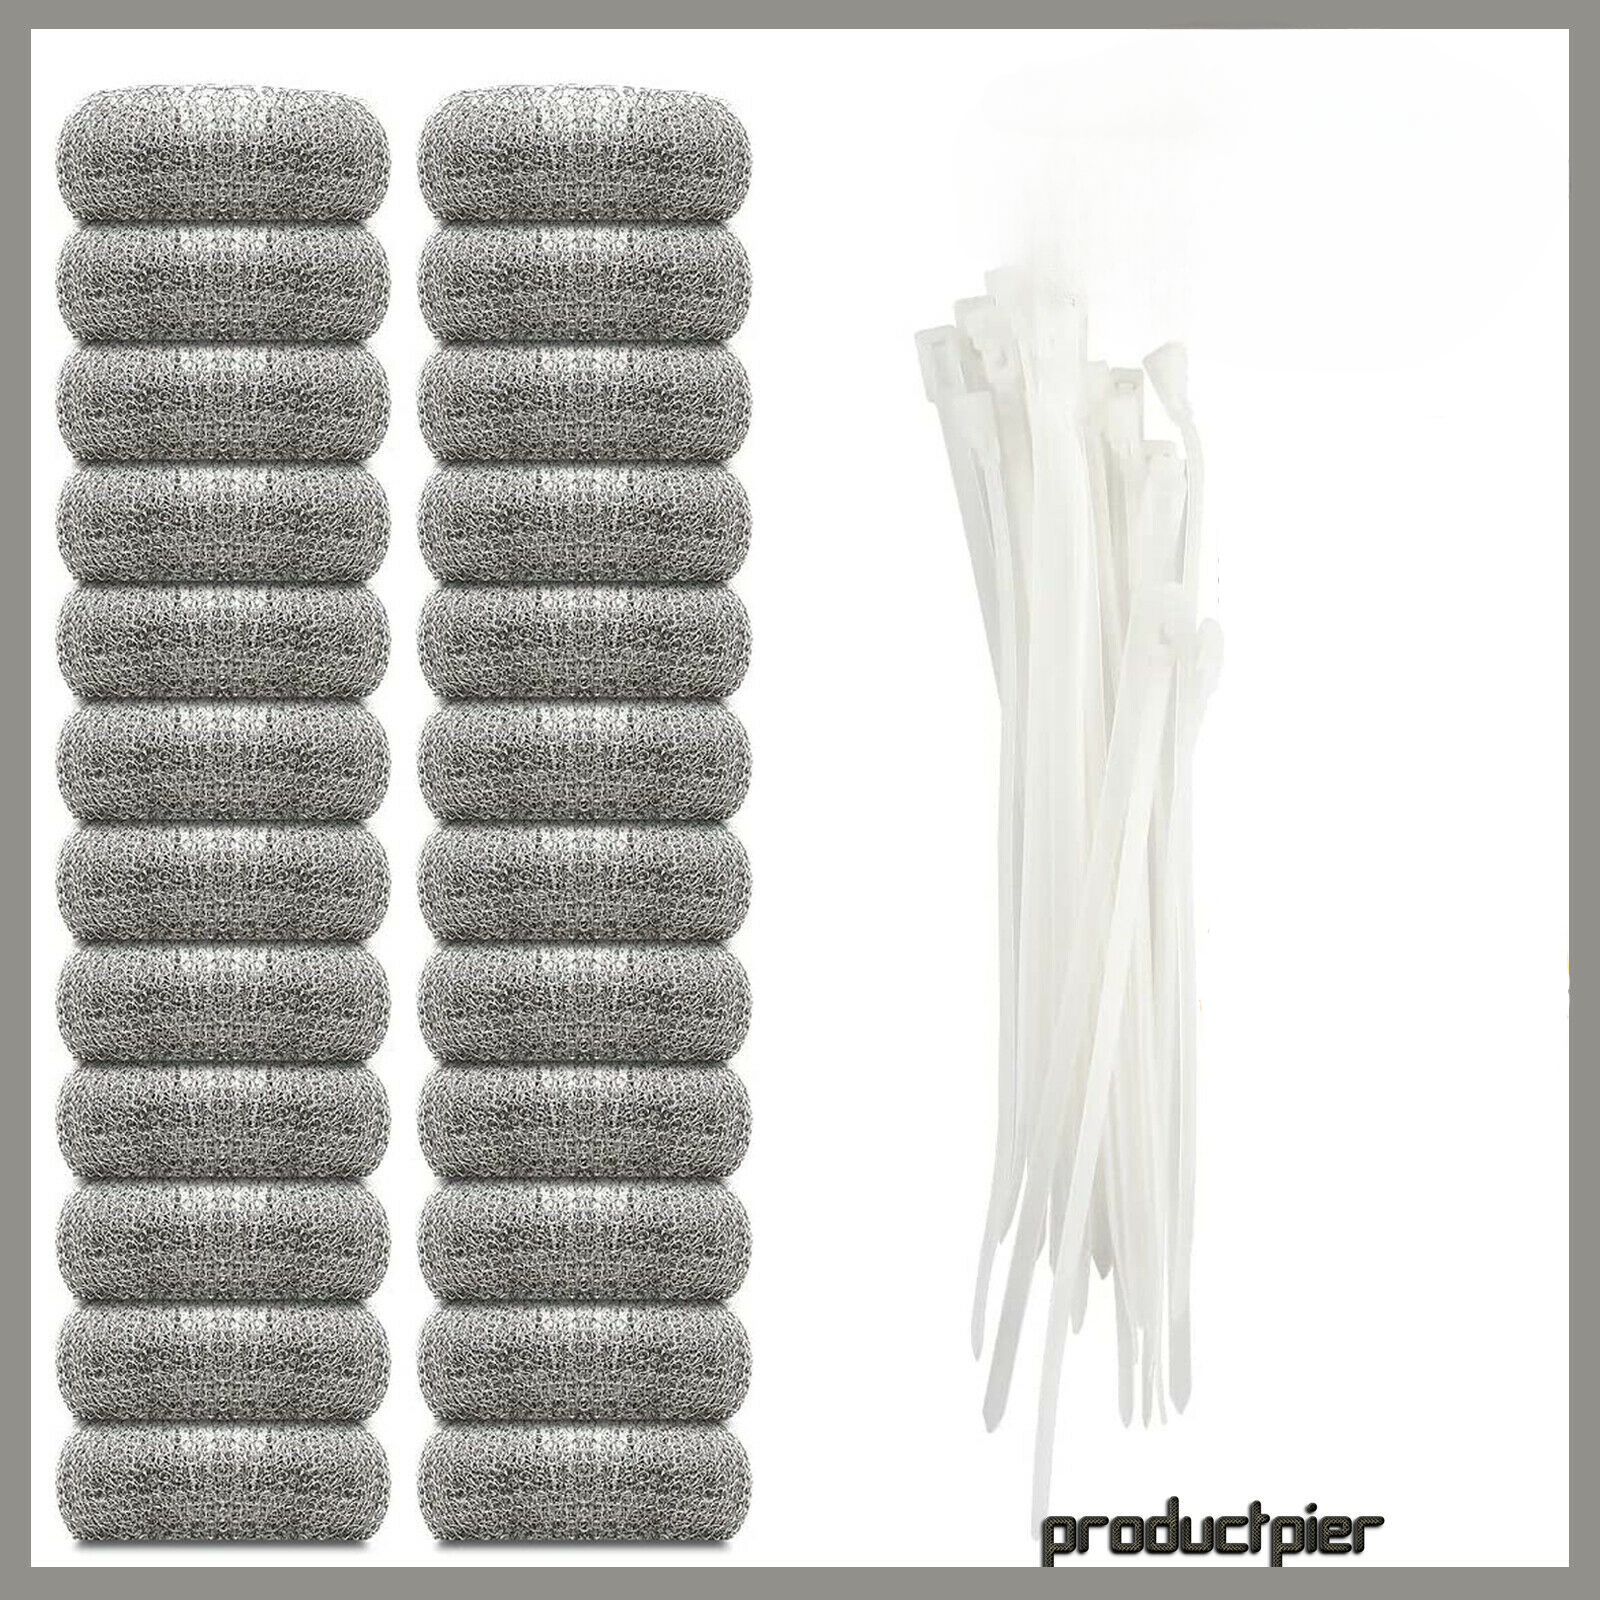 24 Pieces Lint Traps Stainless Steel Washing Machine Lint Snare Trap ,Washer Hose Filter with 24 Pieces Cable Ties